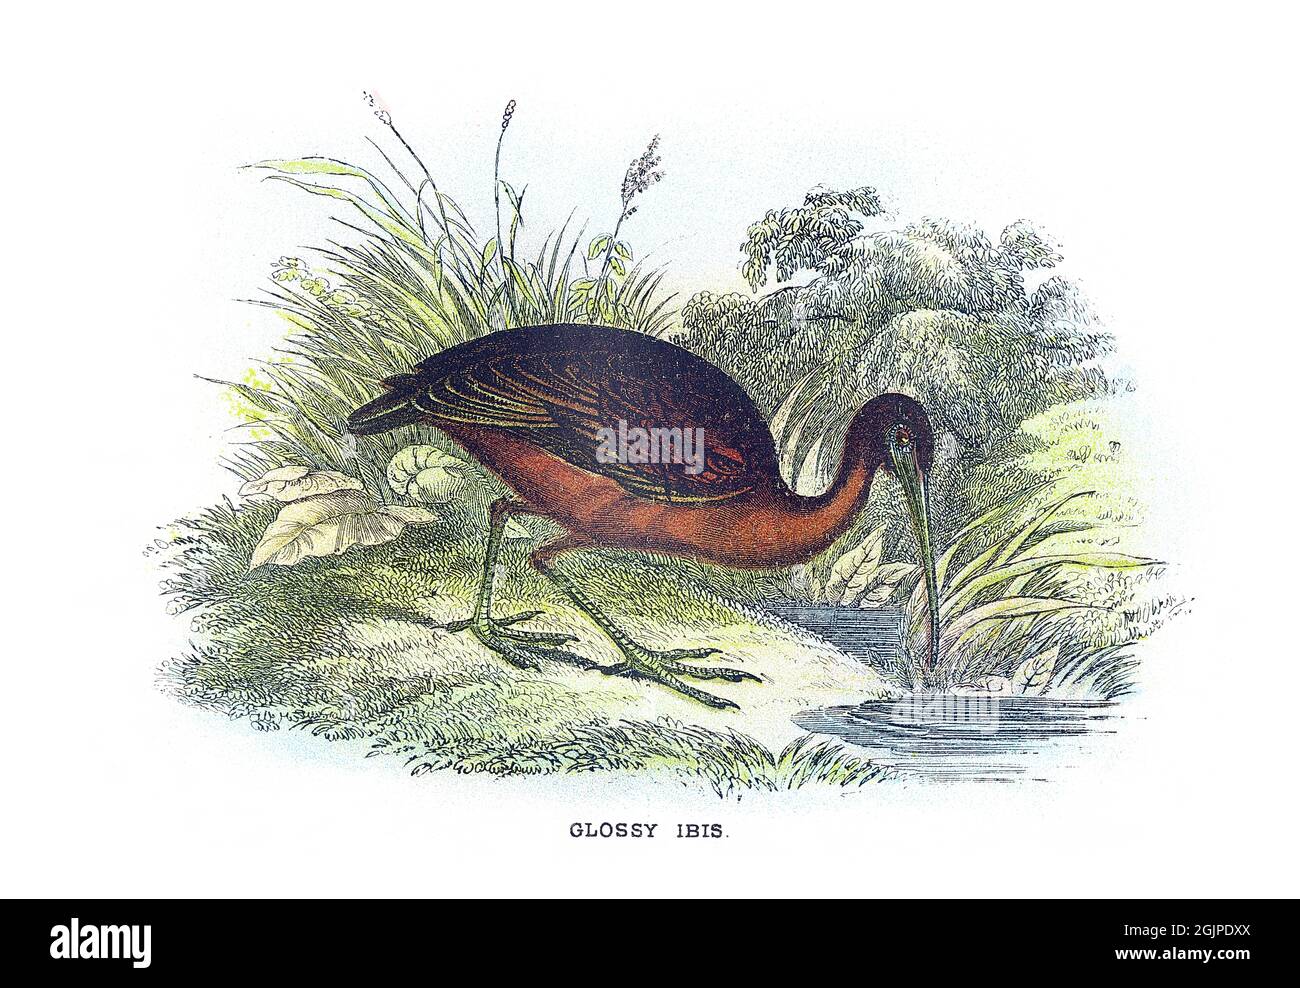 The glossy ibis, Plegadis falcinellus, is a water bird in the order Pelecaniformes and the ibis and spoonbill family Threskiornithidae. Stock Photo